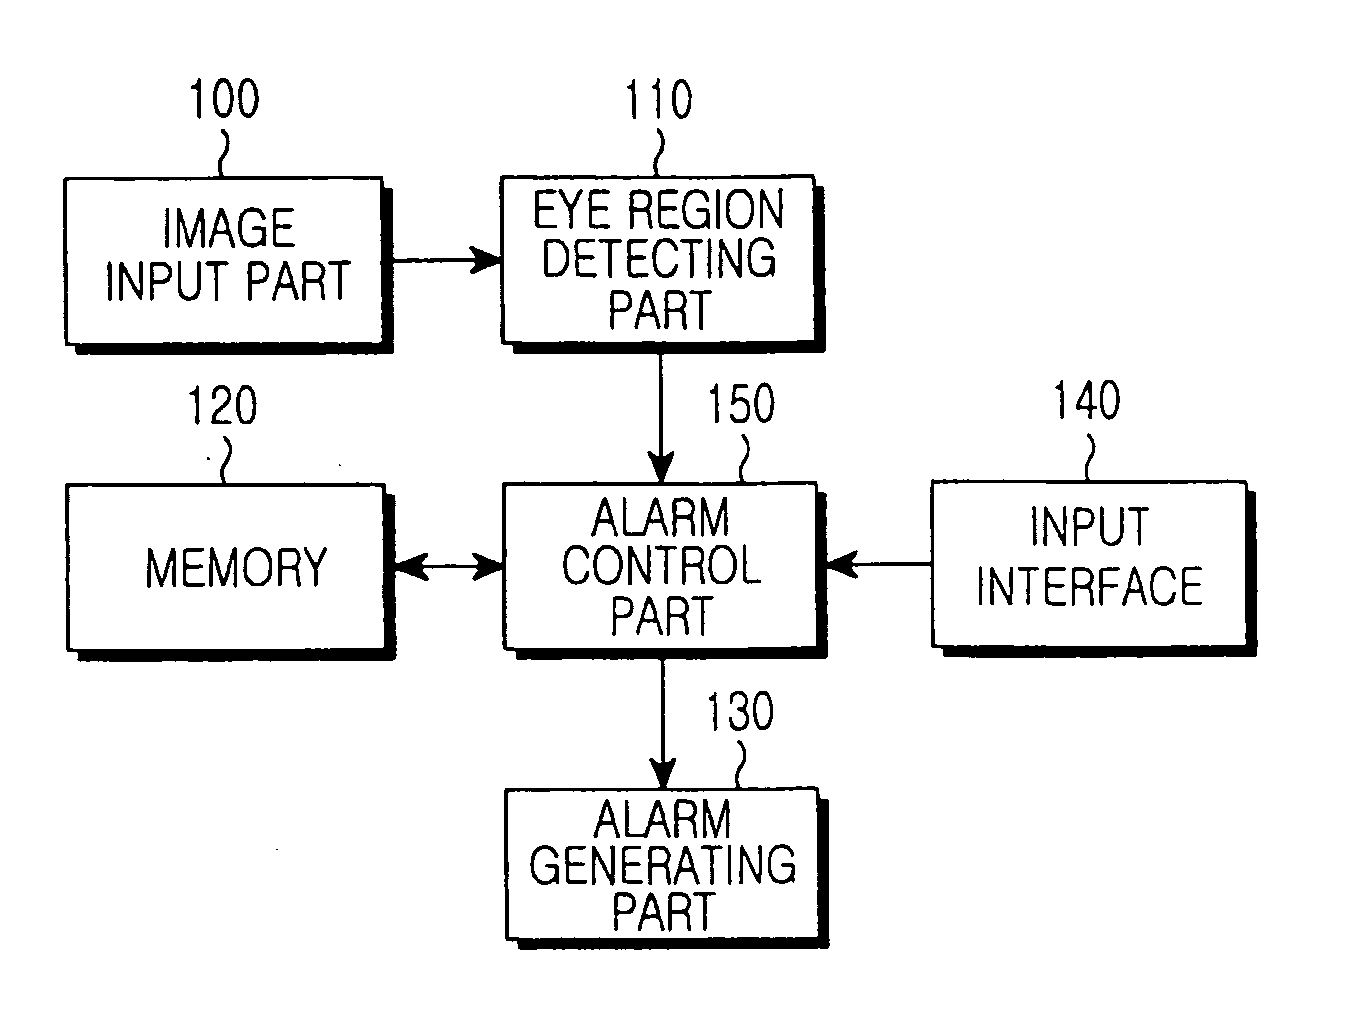 Alarm control apparatus and method using face recognition